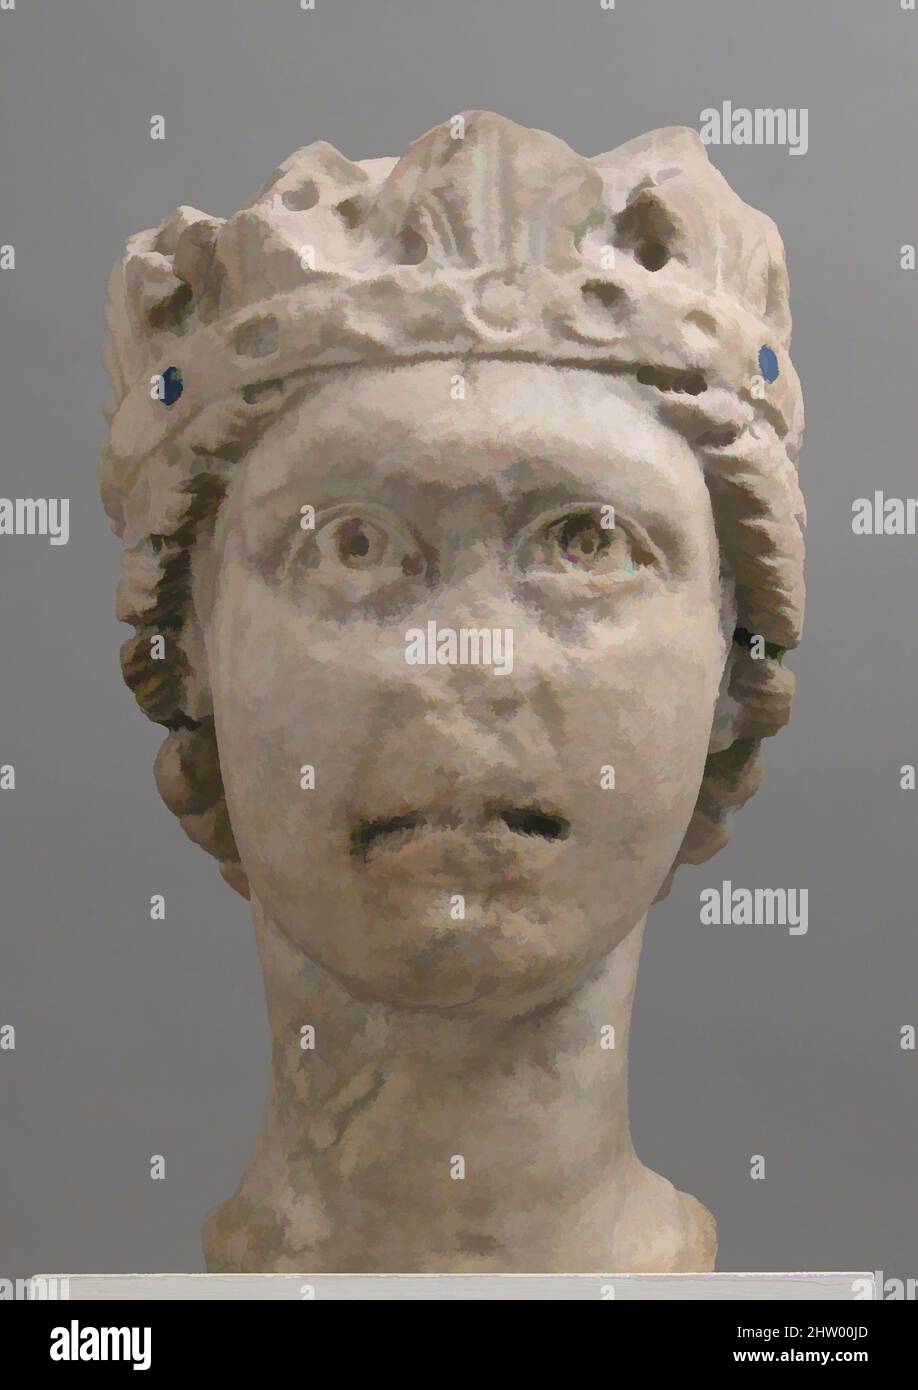 Art inspired by Crowned Head of a Woman, ca. 1270, Made in Campania probably, Southern Italy, South Italian, Marble (Lunense marble from Carrera (Italy), traces of lapis lazuli and lead, Overall (without mount): 13 3/4 x 7 7/8 x 7 5/8 in. (34.9 x 20 x 19.4 cm), Sculpture-Stone, This, Classic works modernized by Artotop with a splash of modernity. Shapes, color and value, eye-catching visual impact on art. Emotions through freedom of artworks in a contemporary way. A timeless message pursuing a wildly creative new direction. Artists turning to the digital medium and creating the Artotop NFT Stock Photo